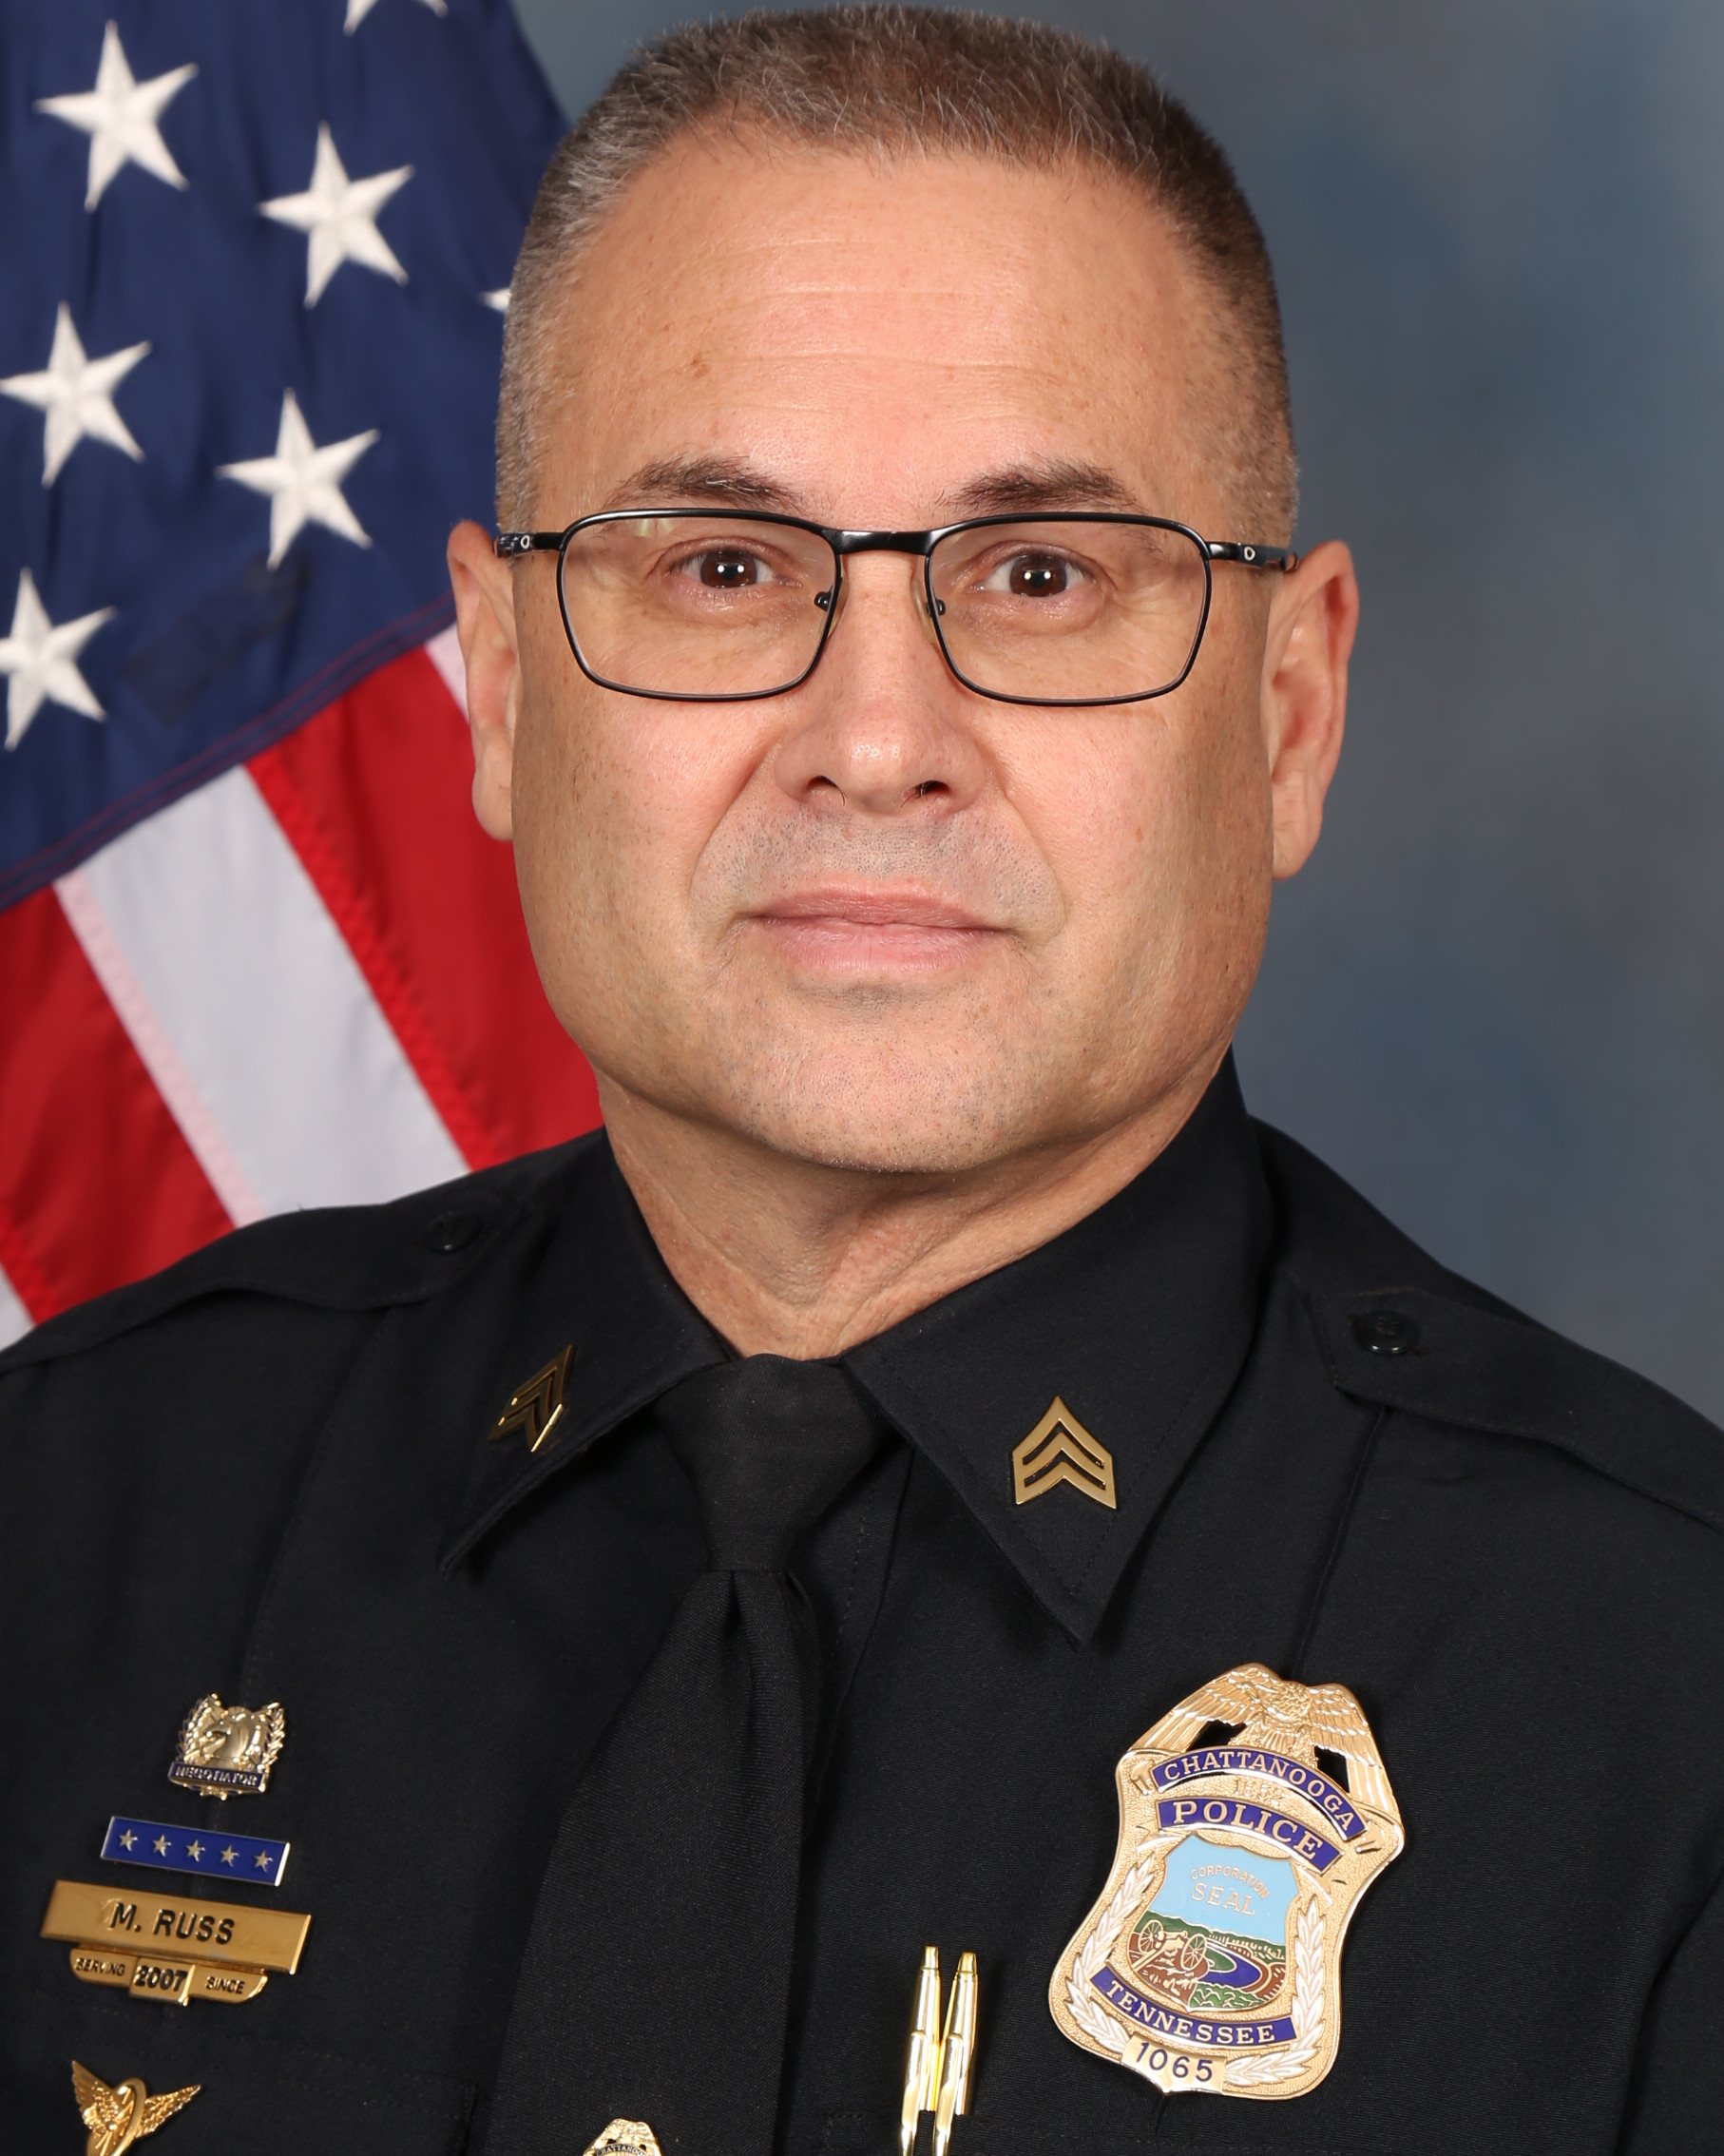 Sergeant James Michael Russ | Chattanooga Police Department, Tennessee